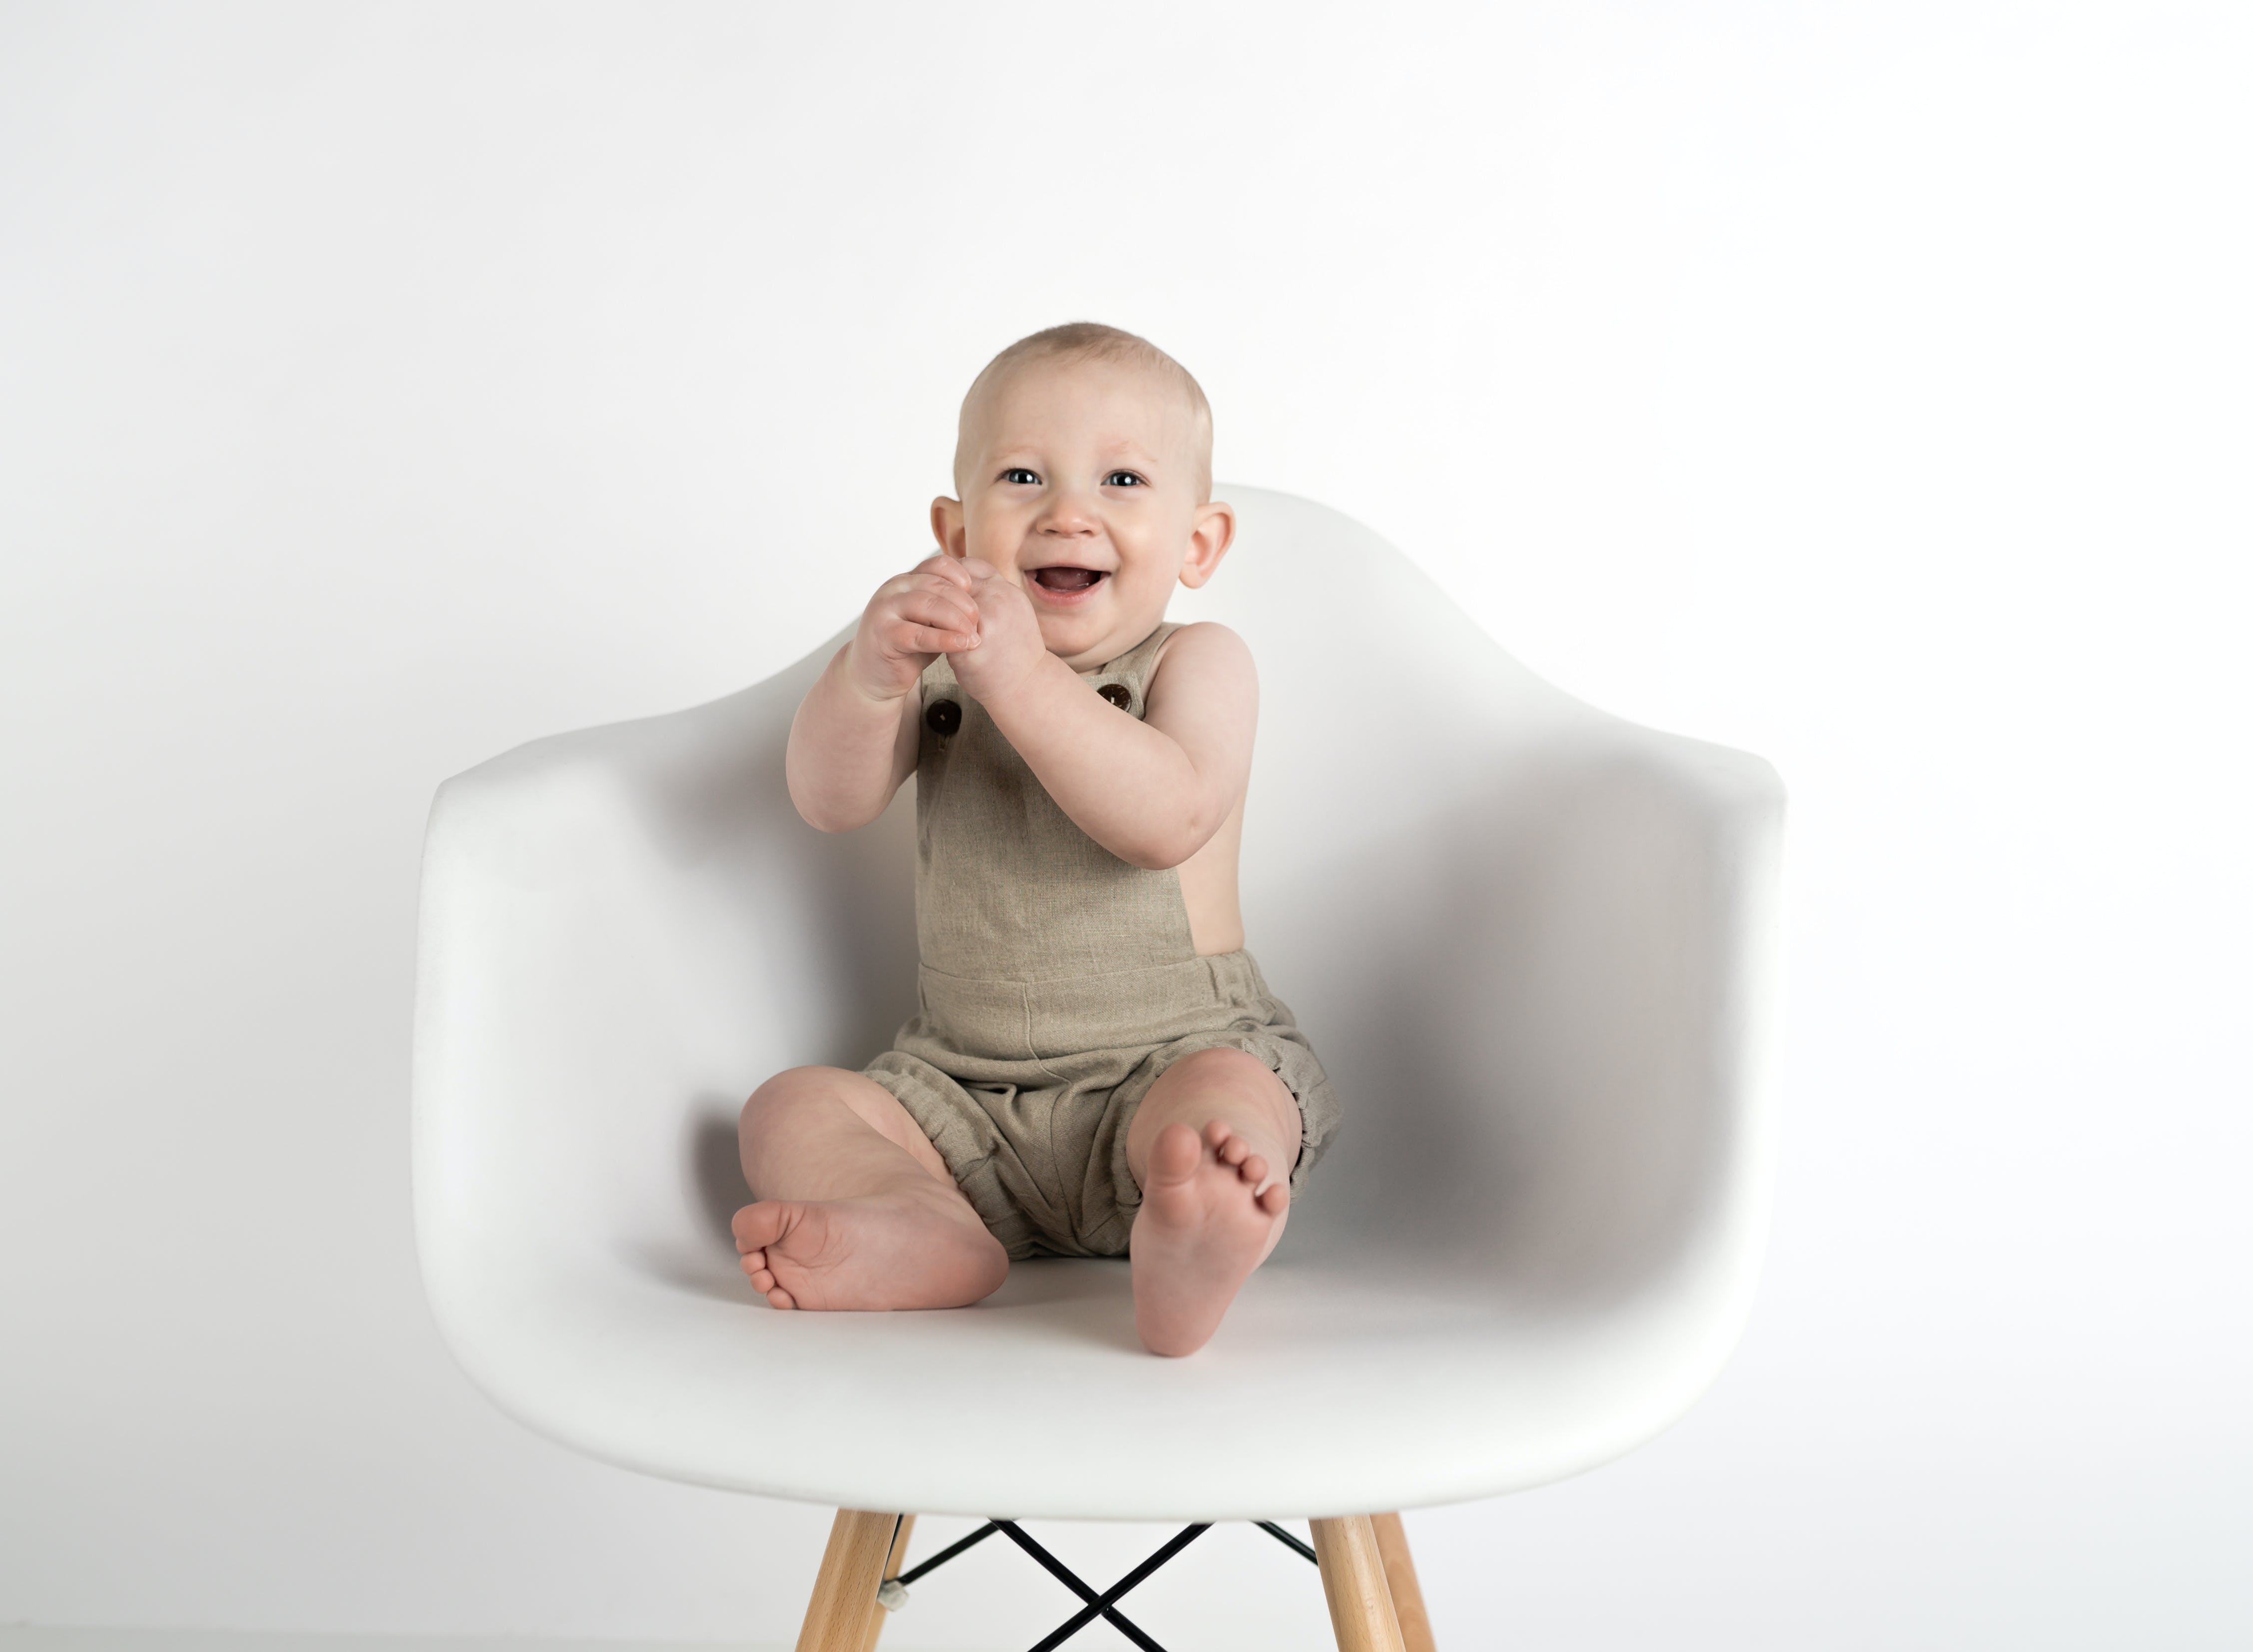 A baby laughing while seated on a chair | Source: Pexels